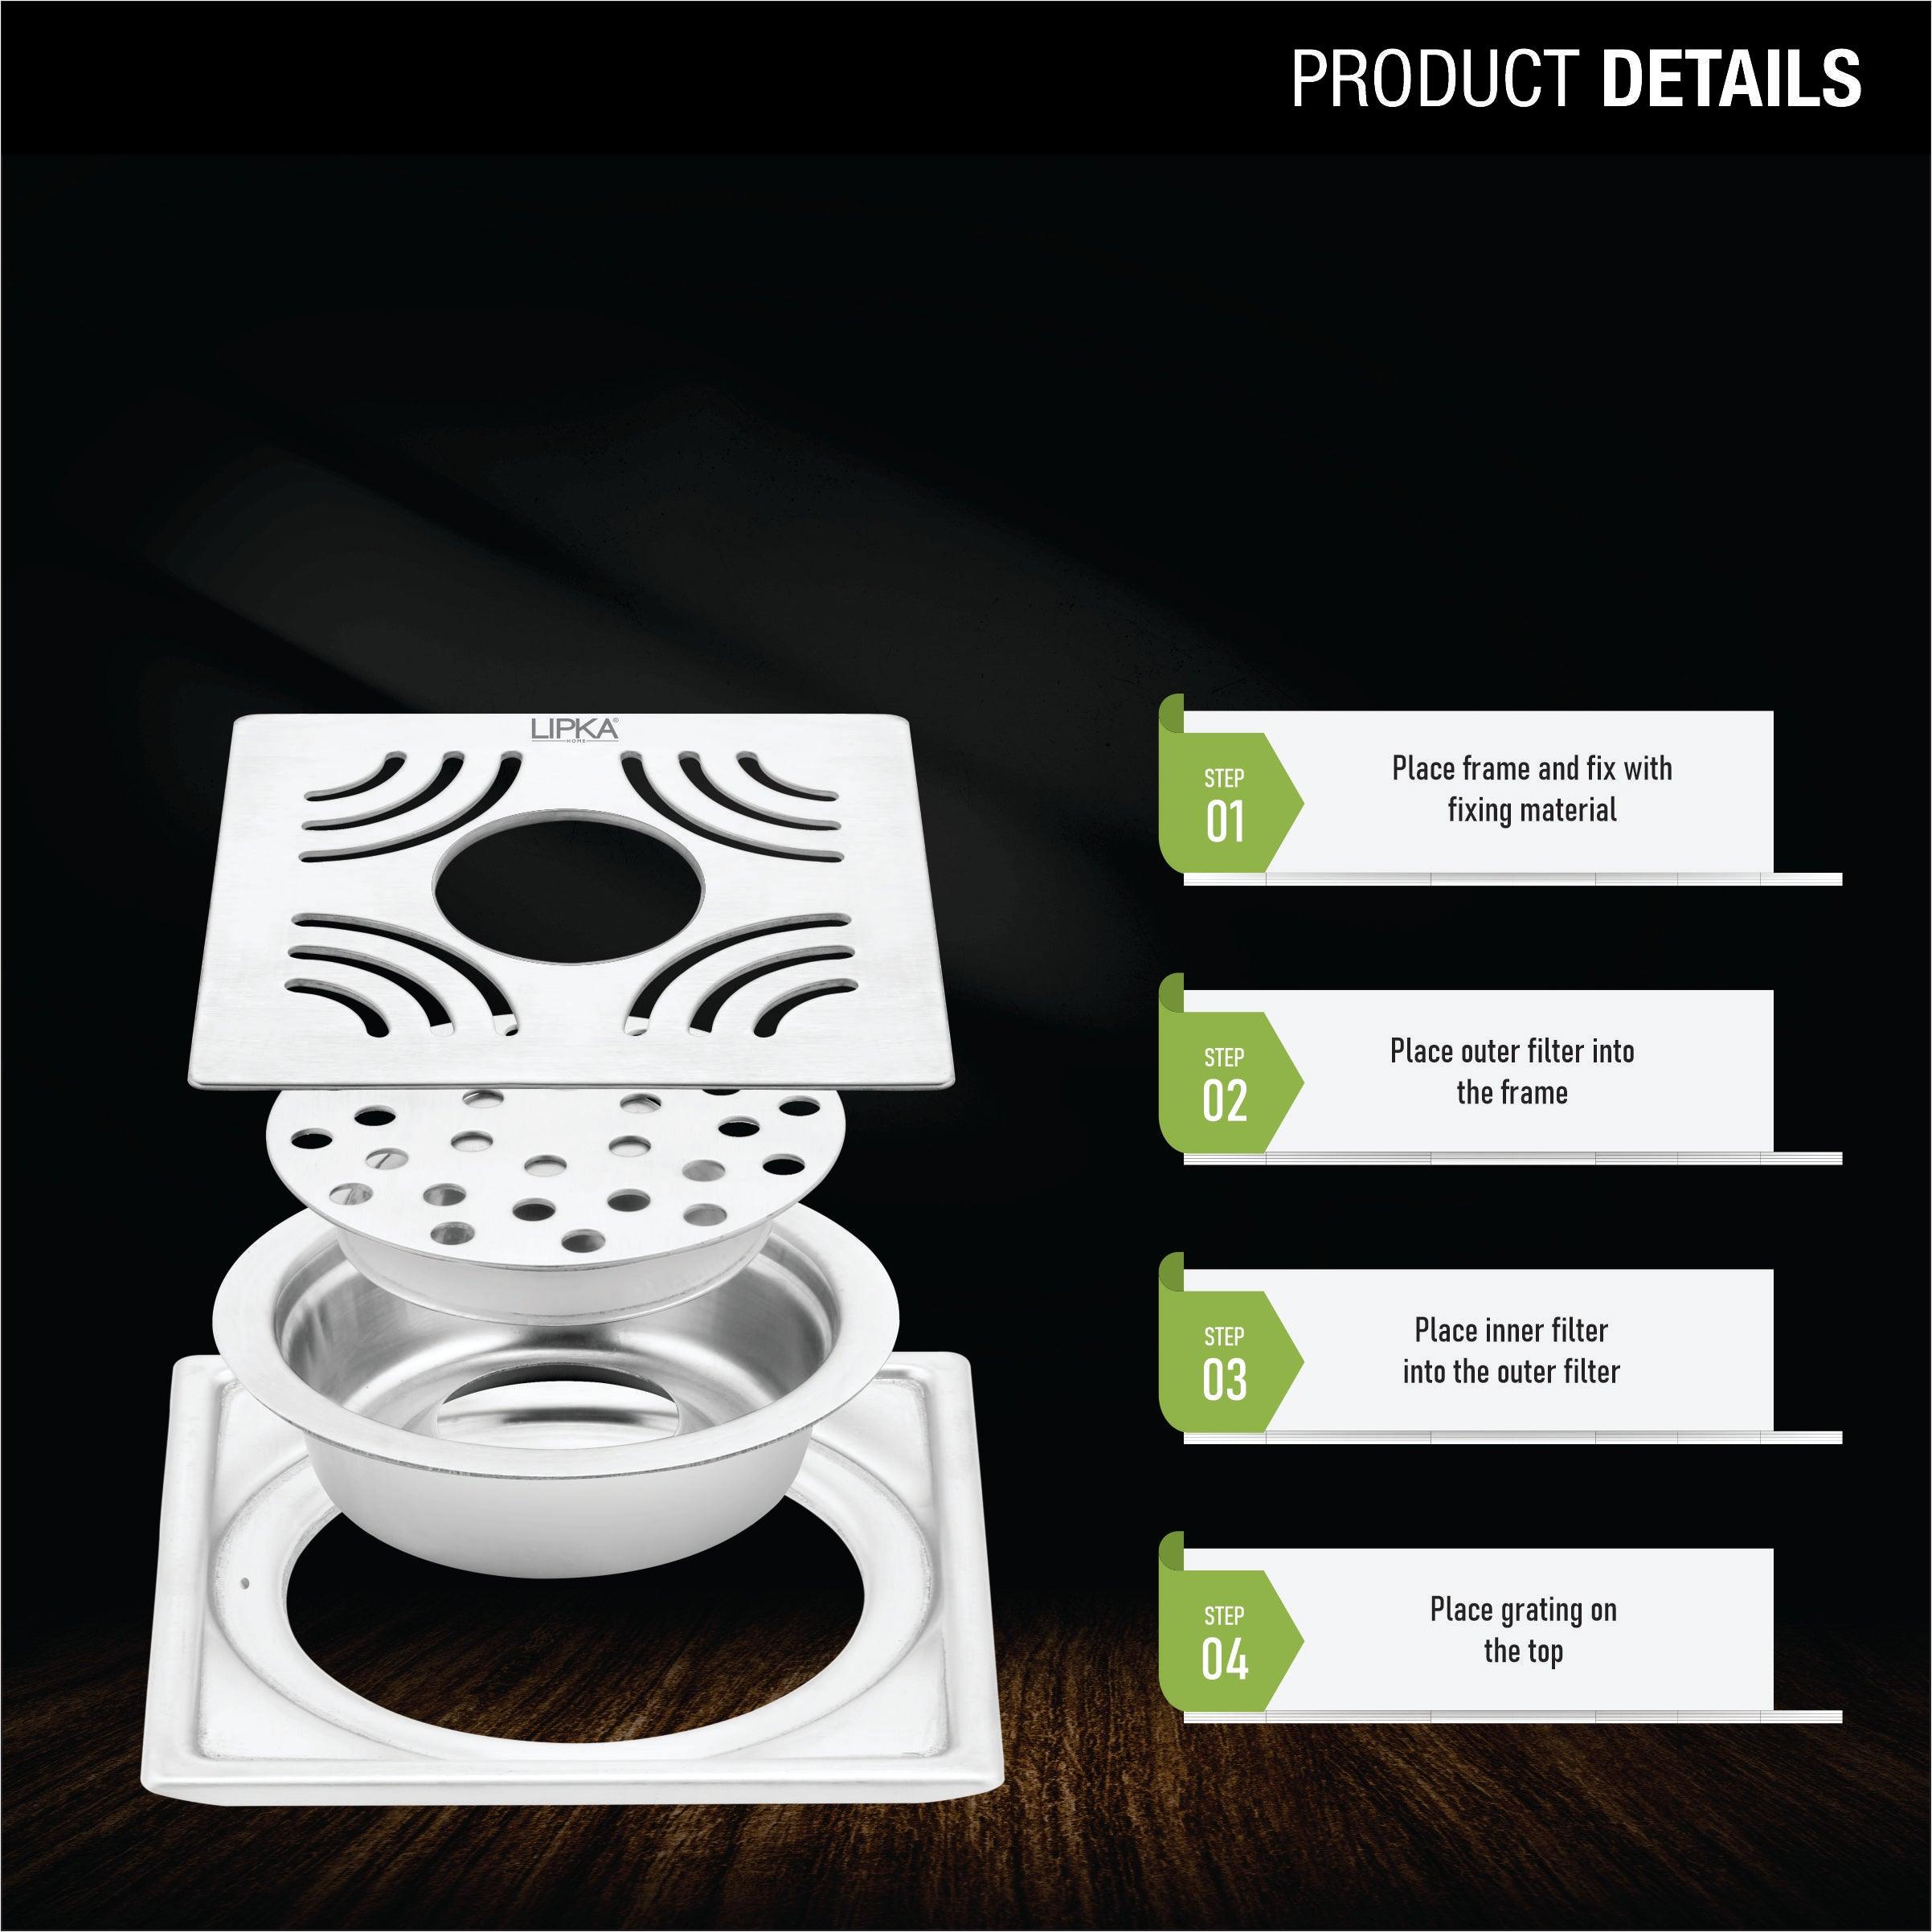 Purple Exclusive Square Floor Drain (6 x 6 Inches) with Hole & Cockroach Trap product details